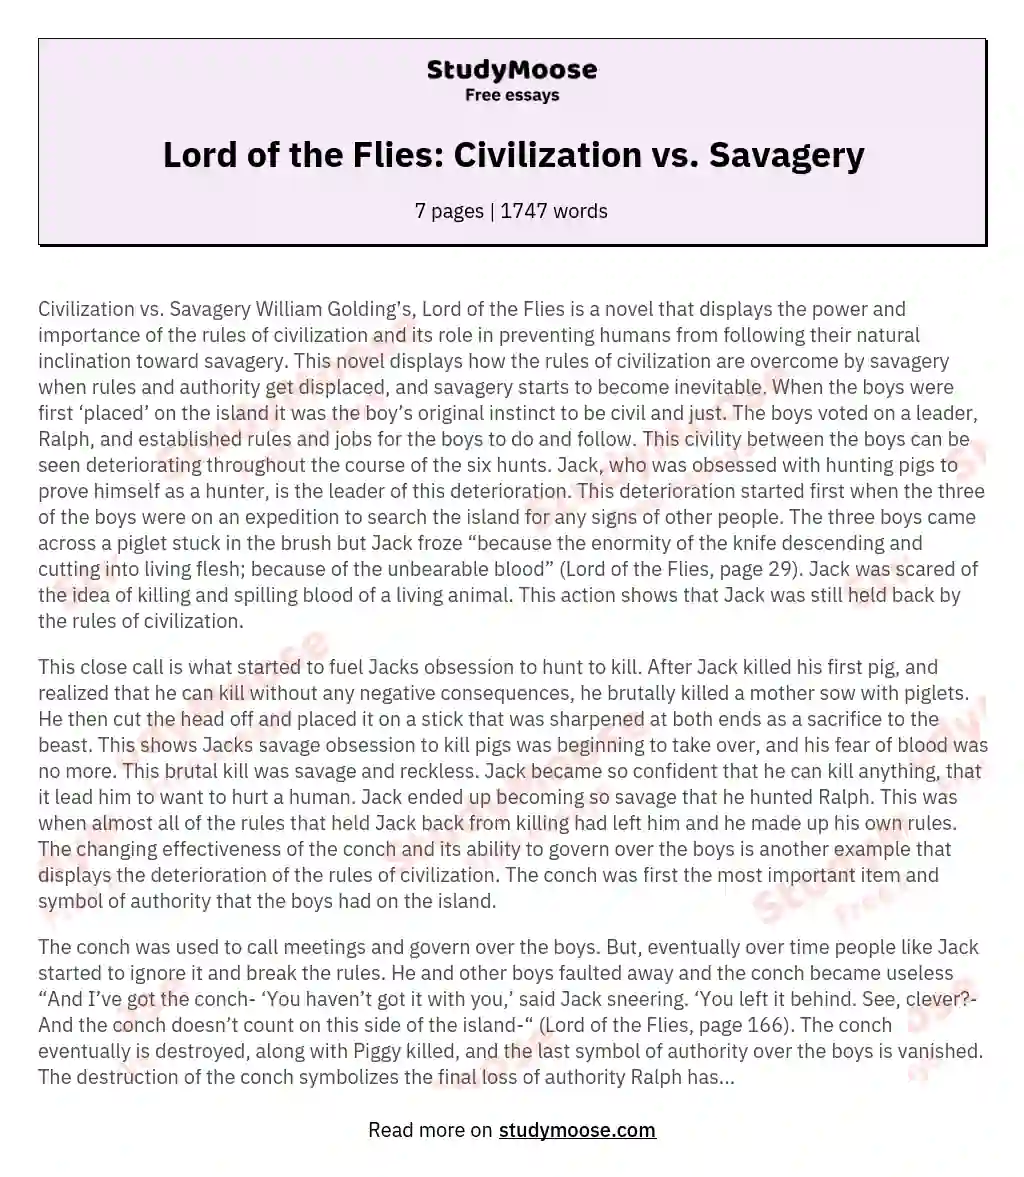 Lord of the Flies: Civilization vs. Savagery essay